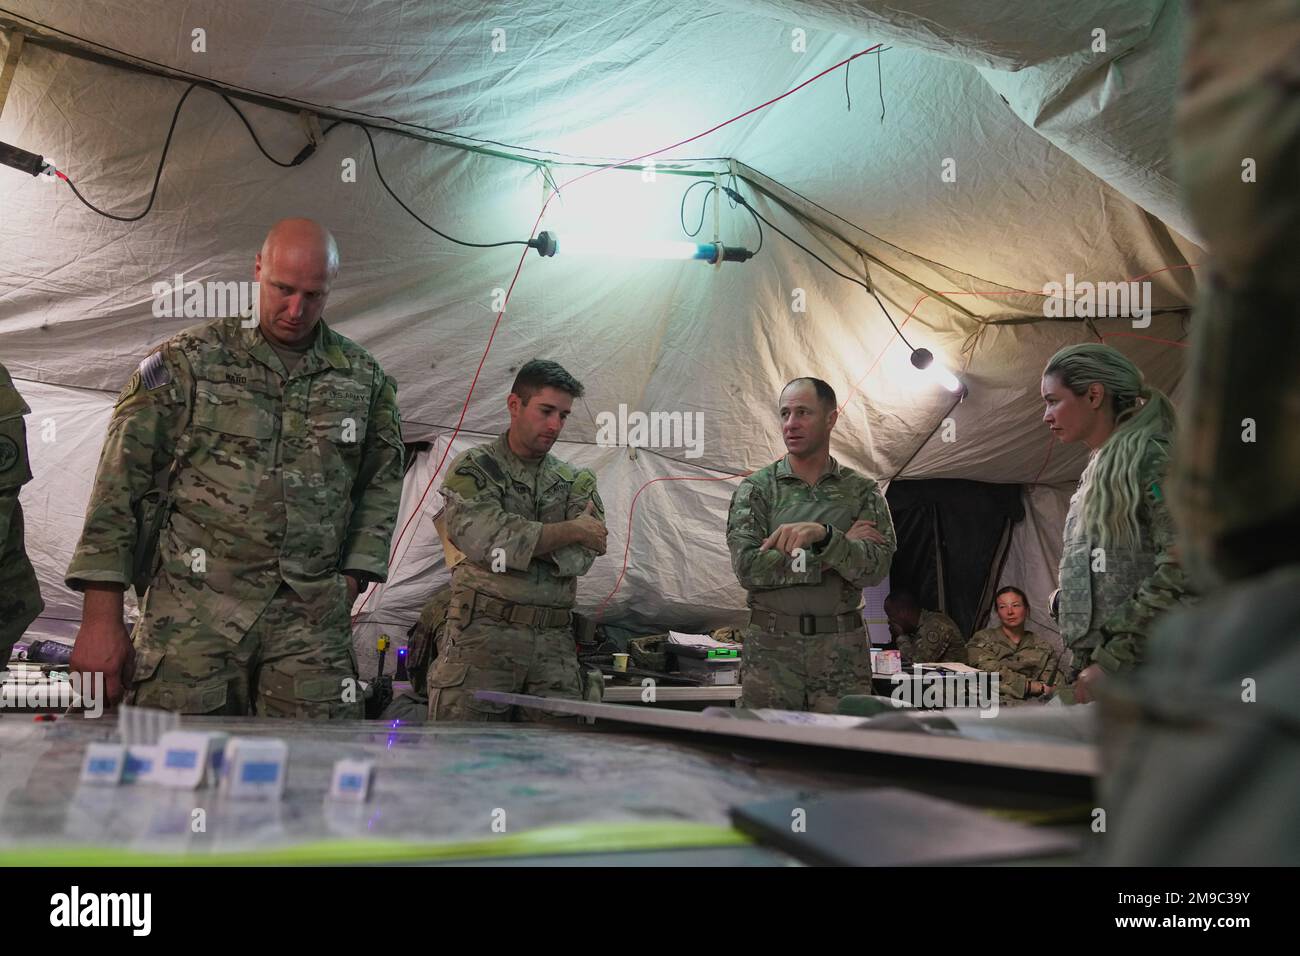 U.S. Army Col. Kevin Bradley, Regimental Commander of the 3d Cavalry Regiment, (middle right) discusses operational plans to his team in the Regimental Tactical Operations Center during a training rotation to the National Training Center, Fort Irwin, California, May 15, 2022. The regiment trained on logistics, attacking, defending and sustainment operations over the span of a few hundred kilometers during the month-long training. Stock Photo